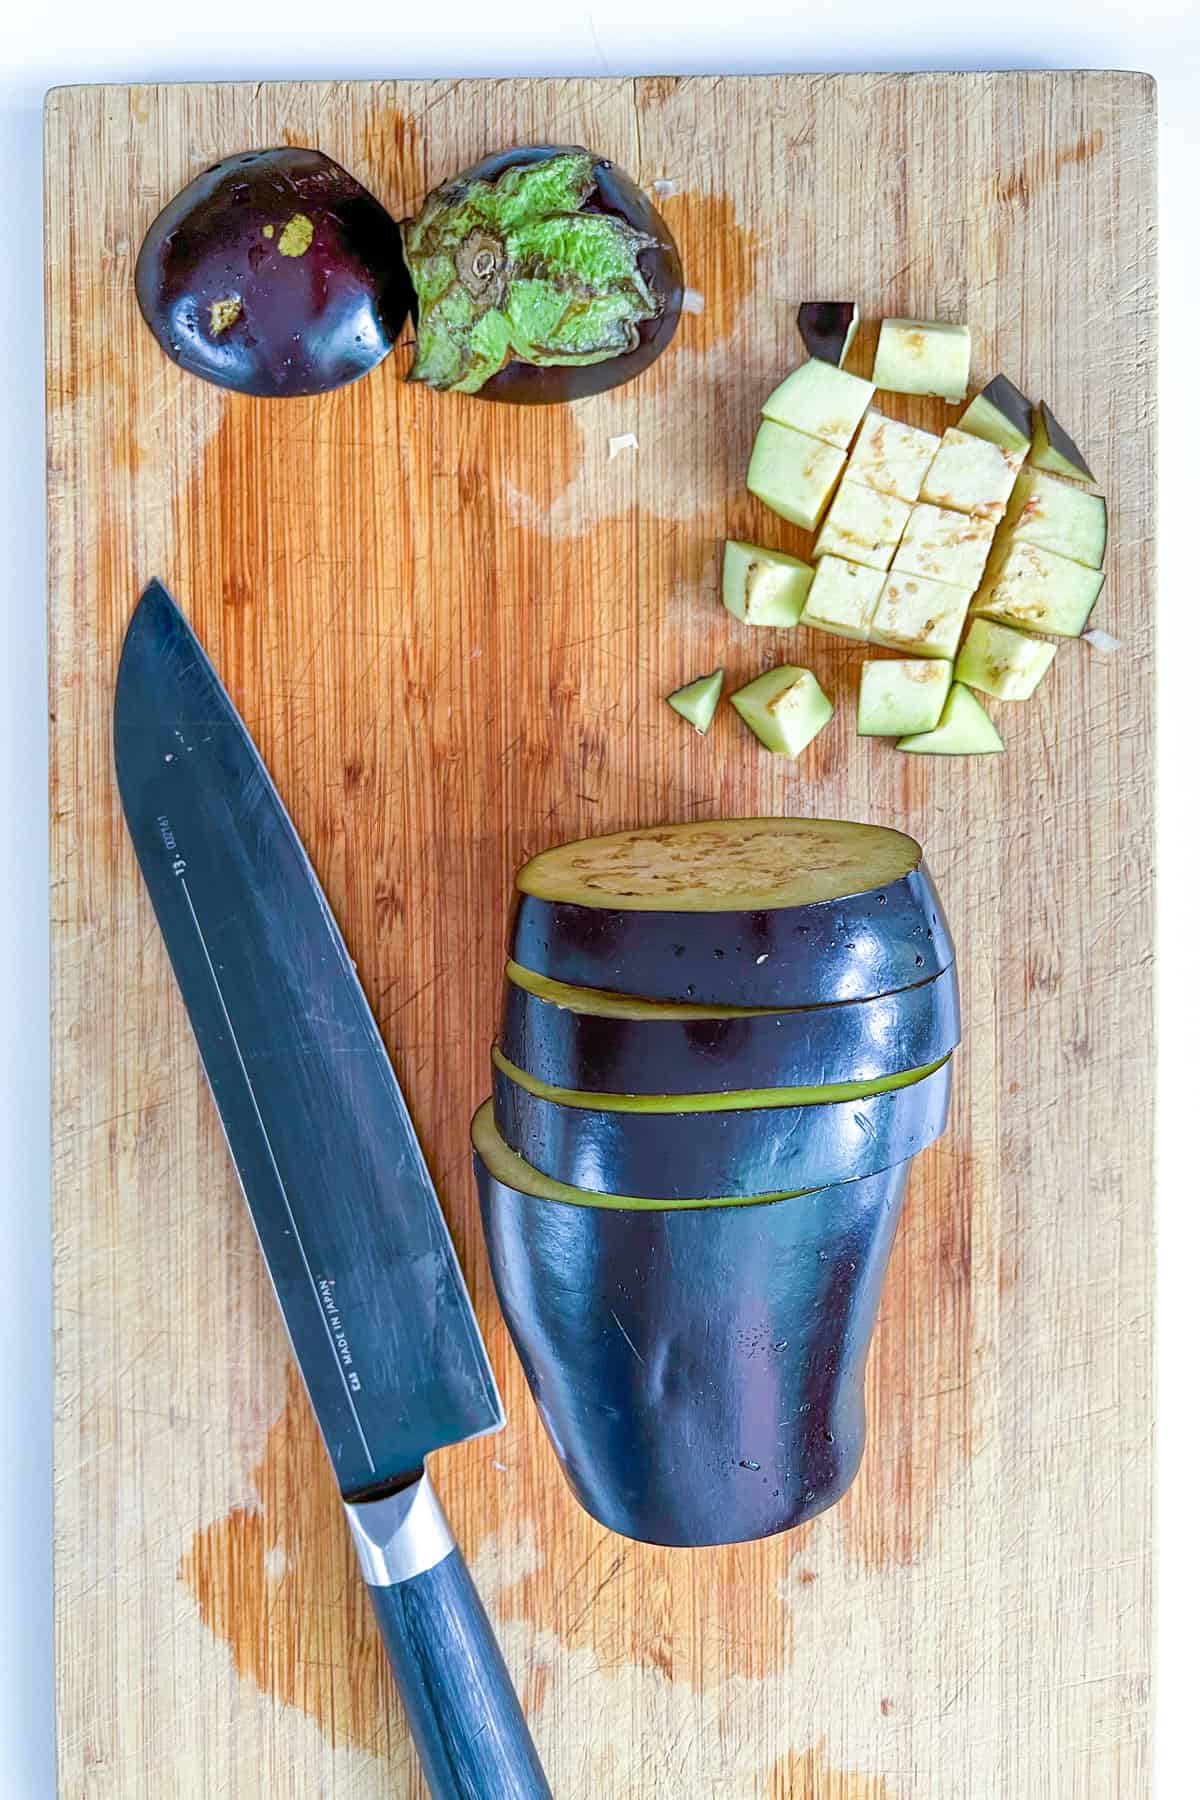 an eggplant cut into rounds, then each round is cubed